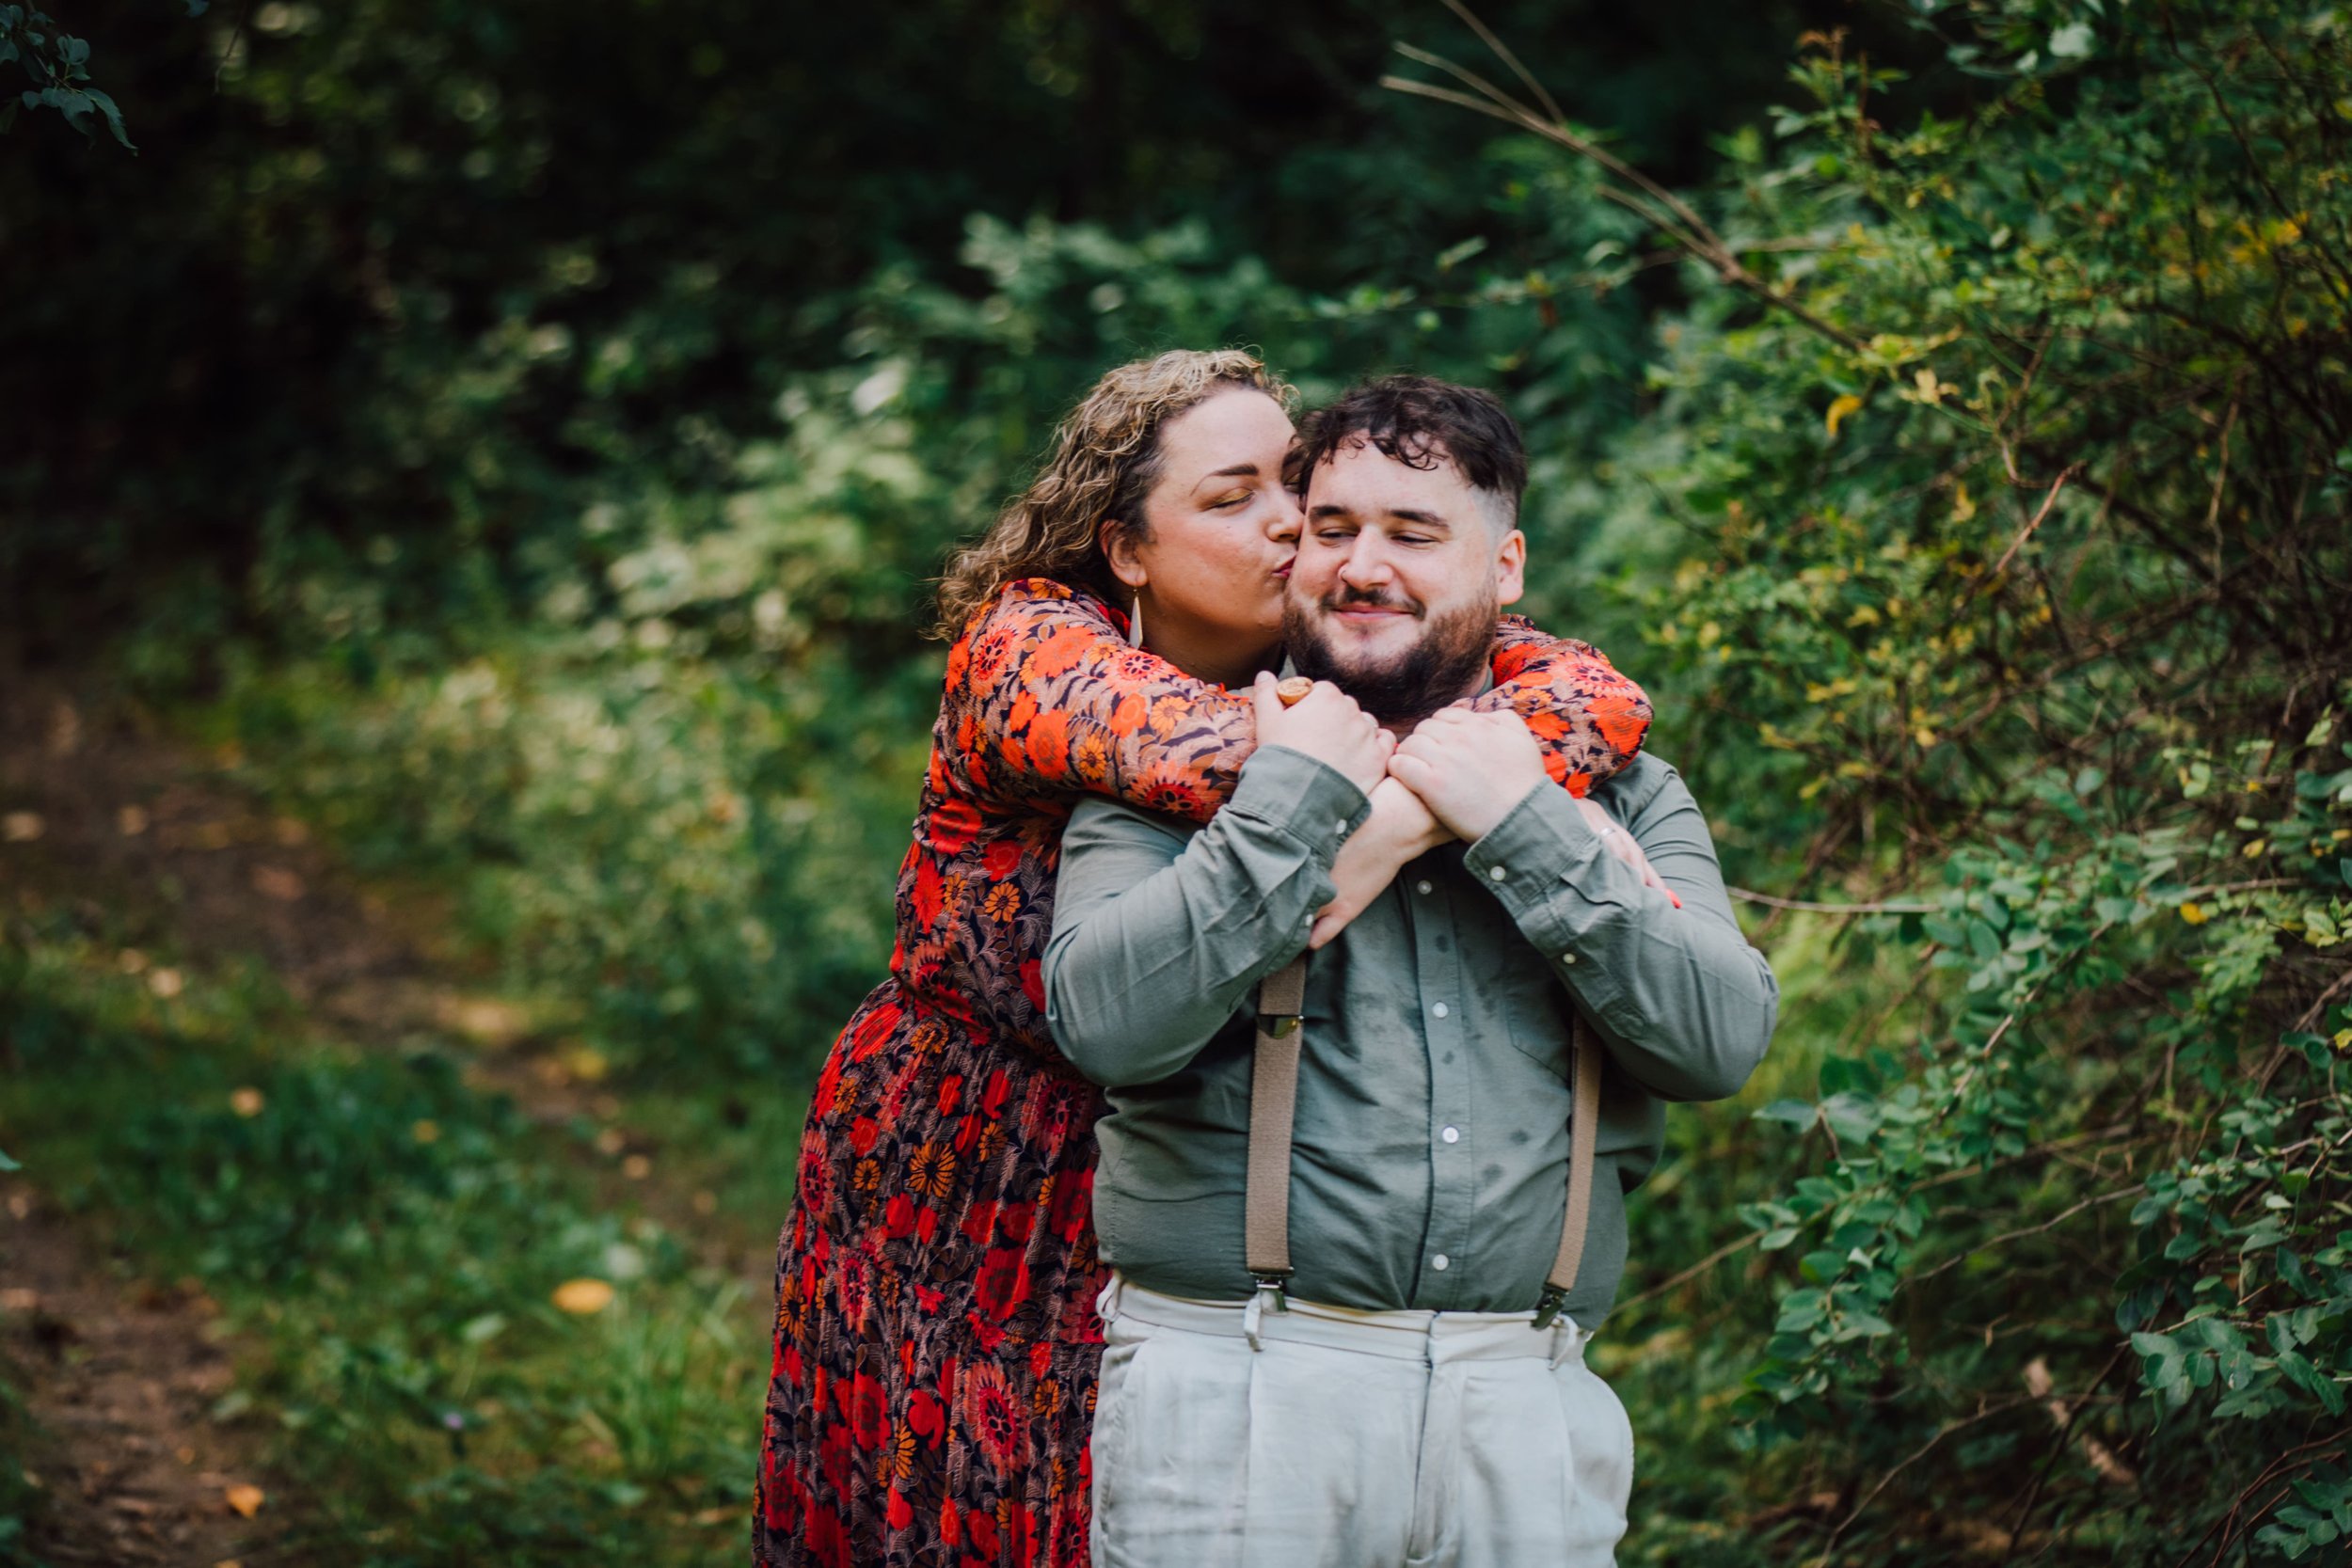  katie kisses her fiancee’s cheek as she stands behind him with her arms wrapped around his shoulders during their forest engagement photos 